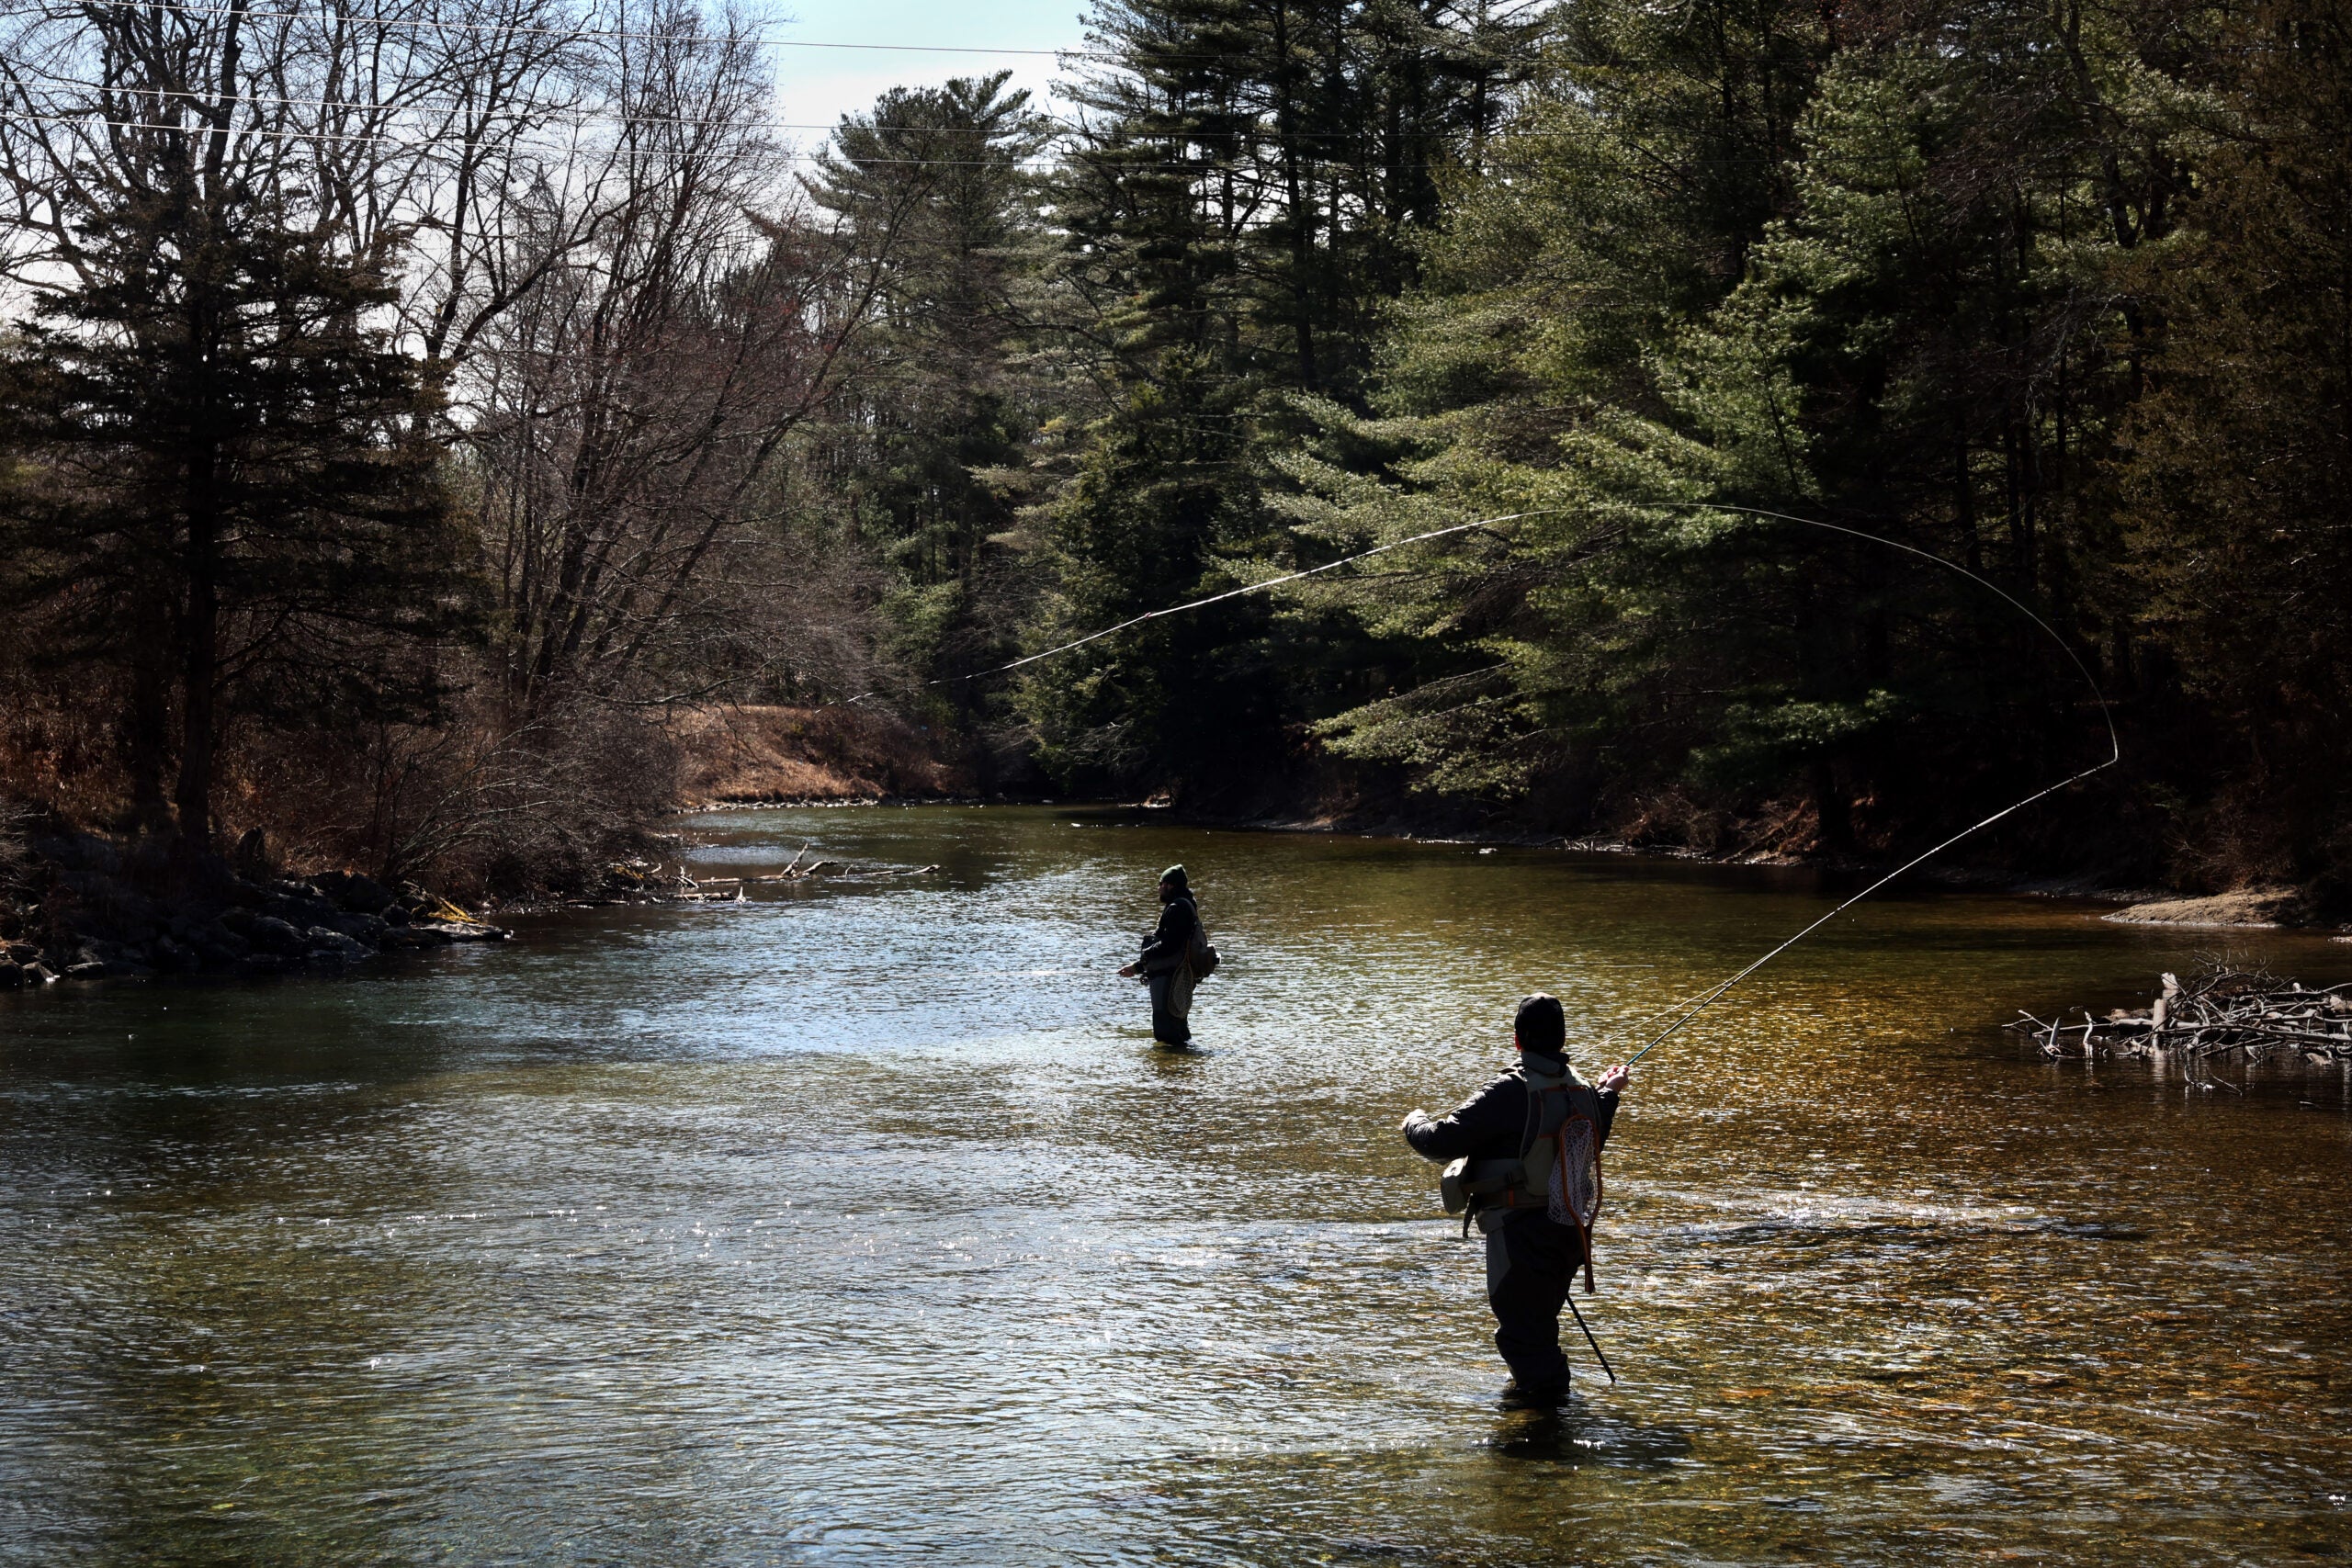 How a tiny Massachusetts river has become a star in the fly-fishing world